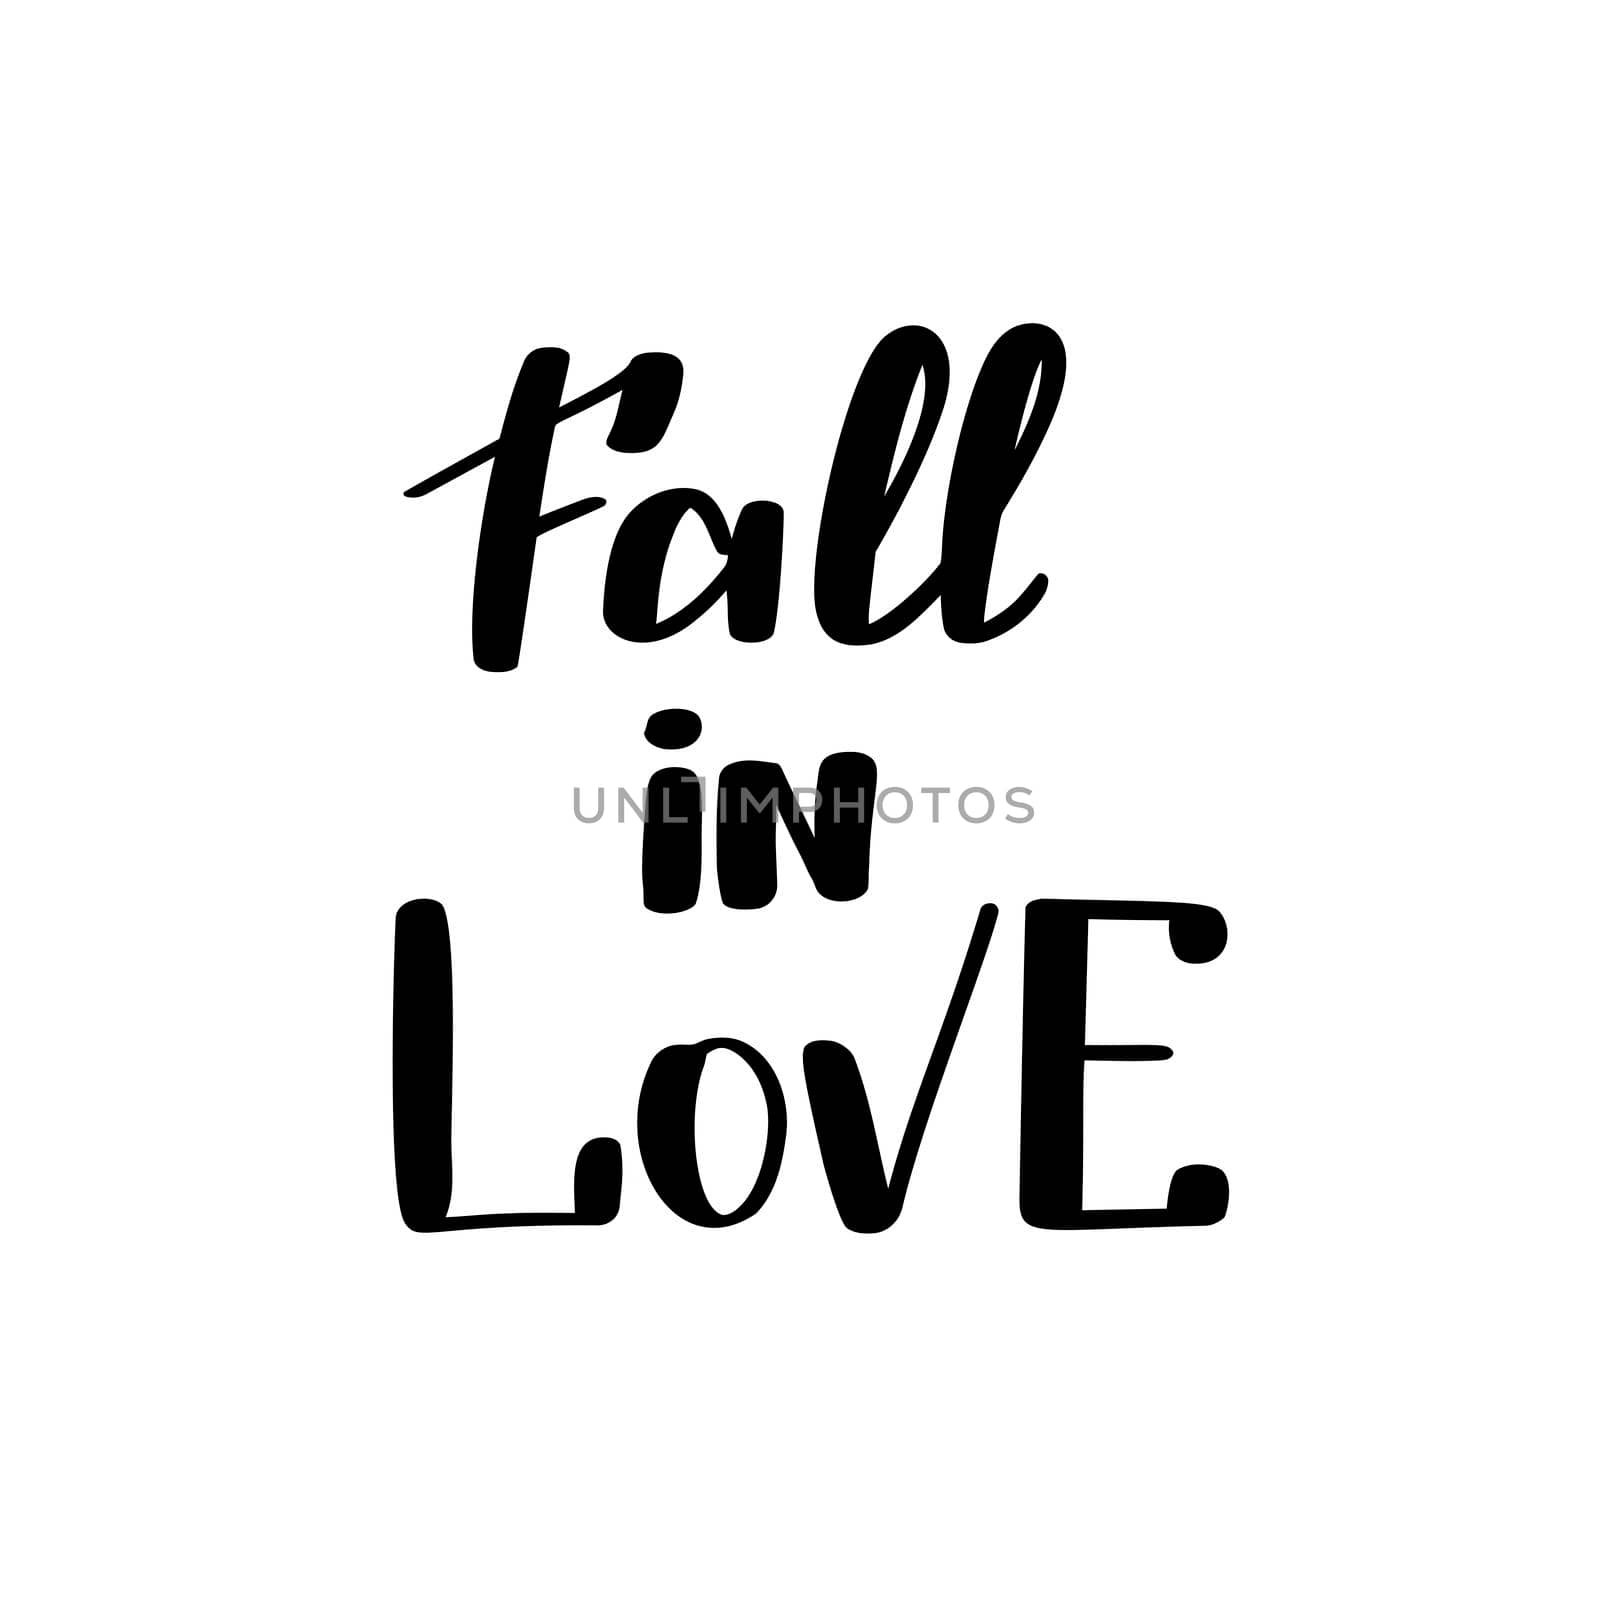 Fall in love. Handwritten lettering isolated on white background. illustration for posters, cards and much more.